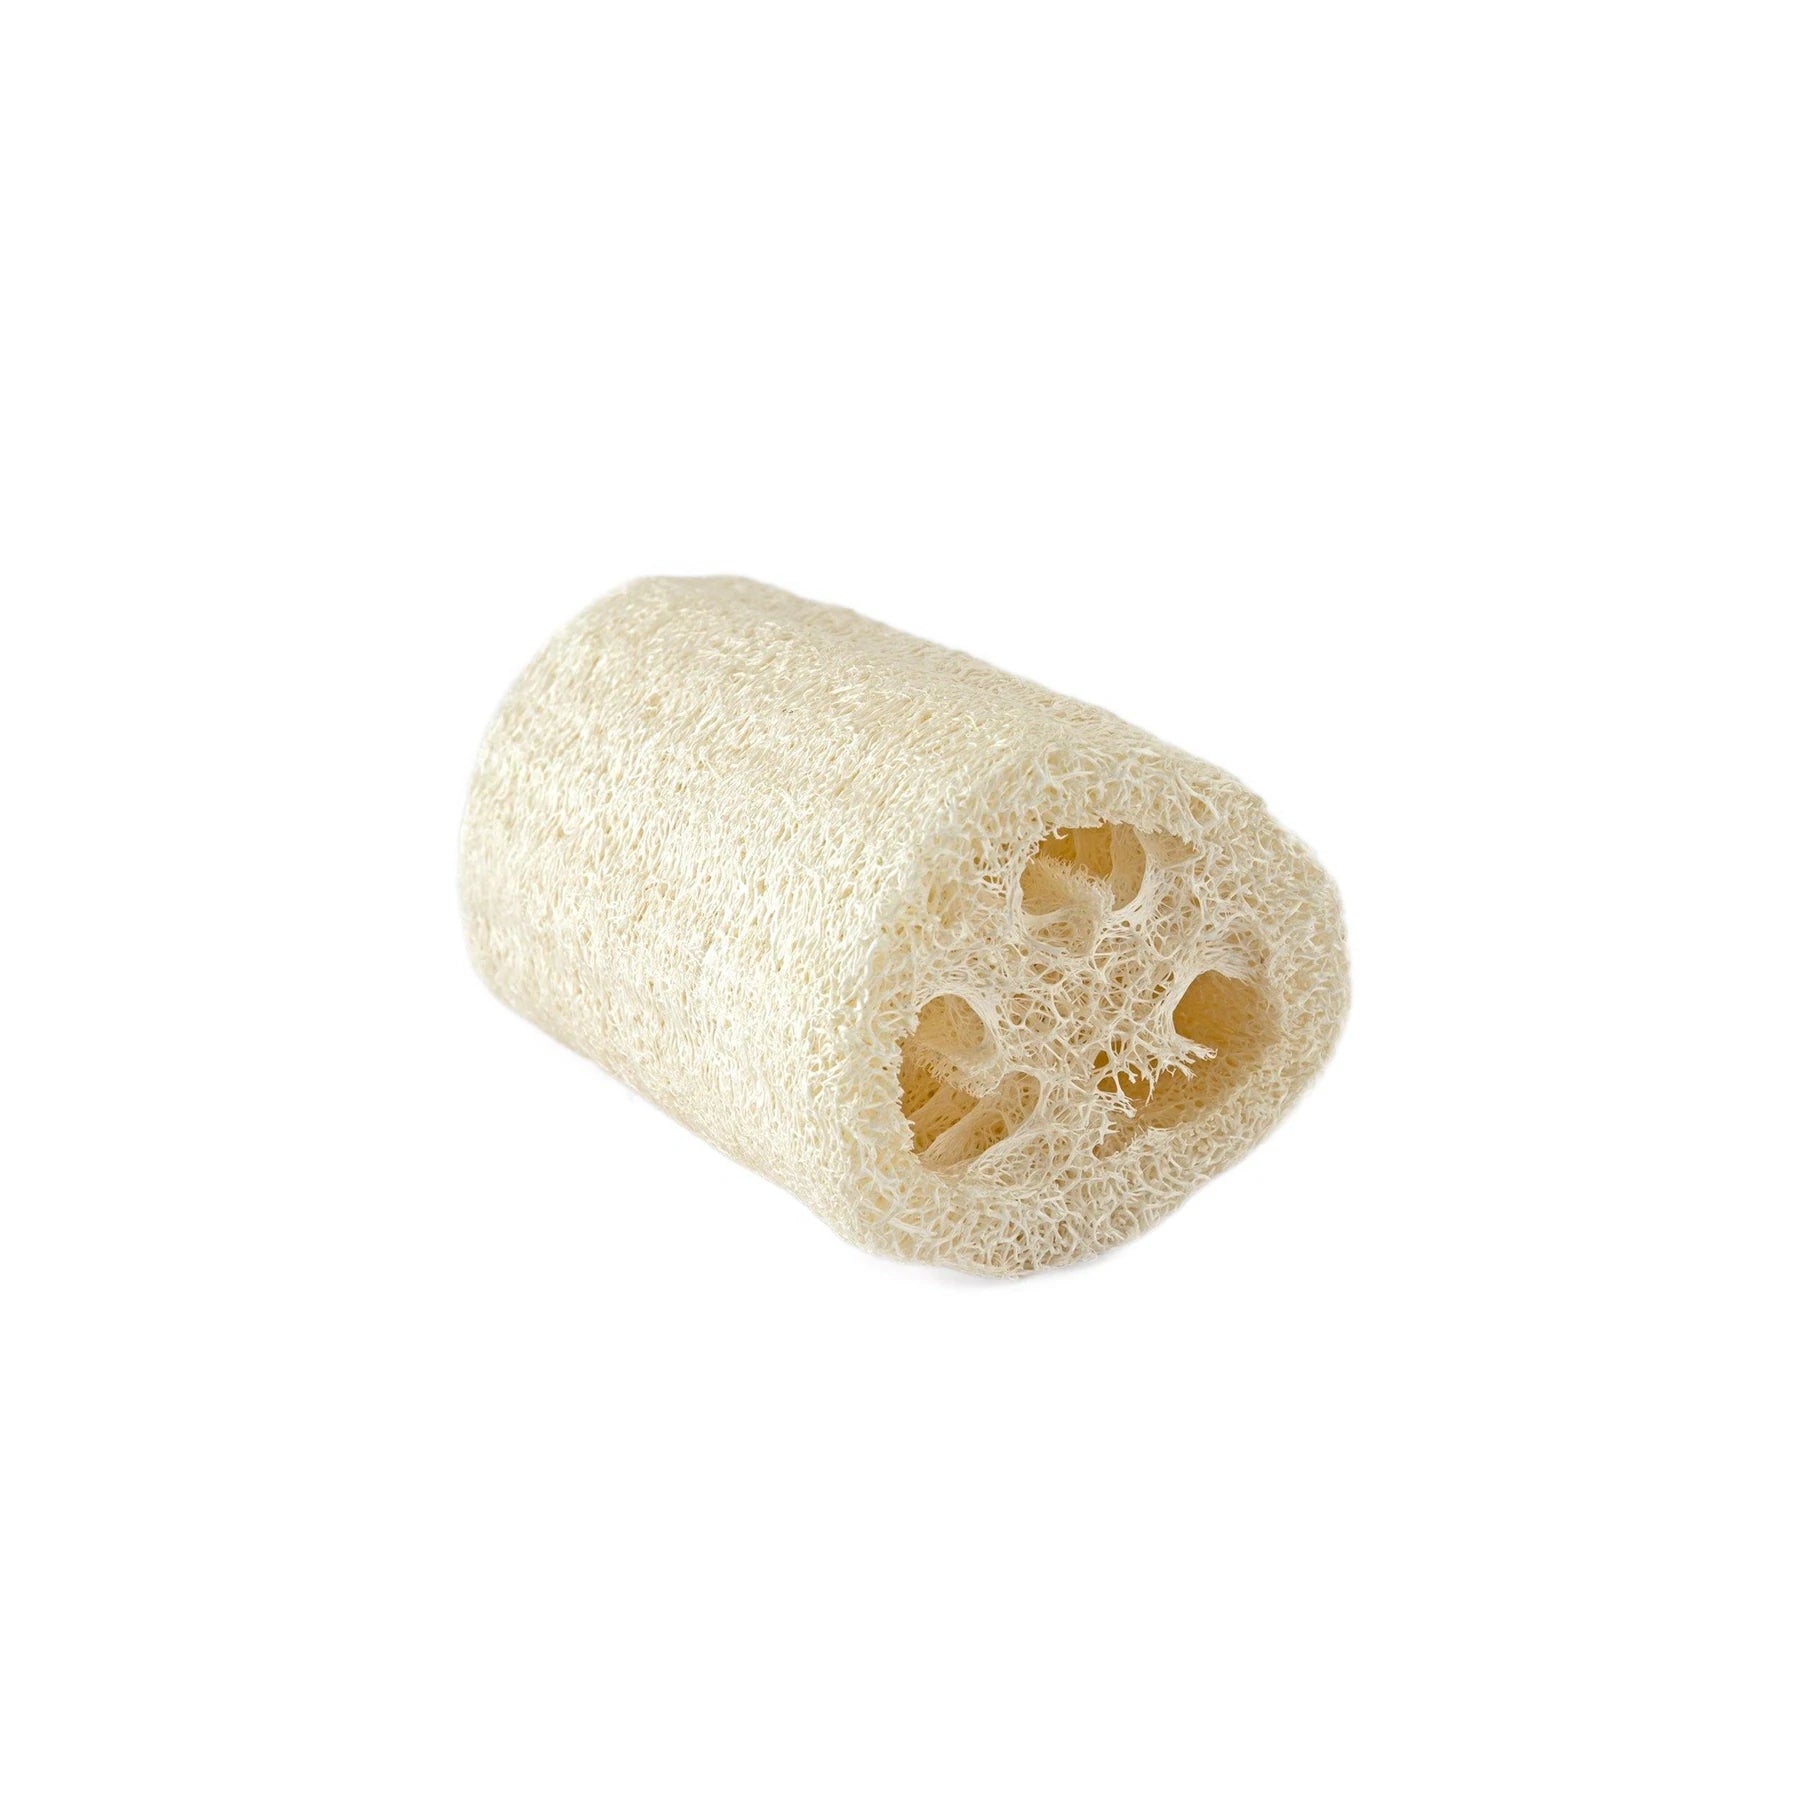 Eco Bath Natural Loofah 5" With String